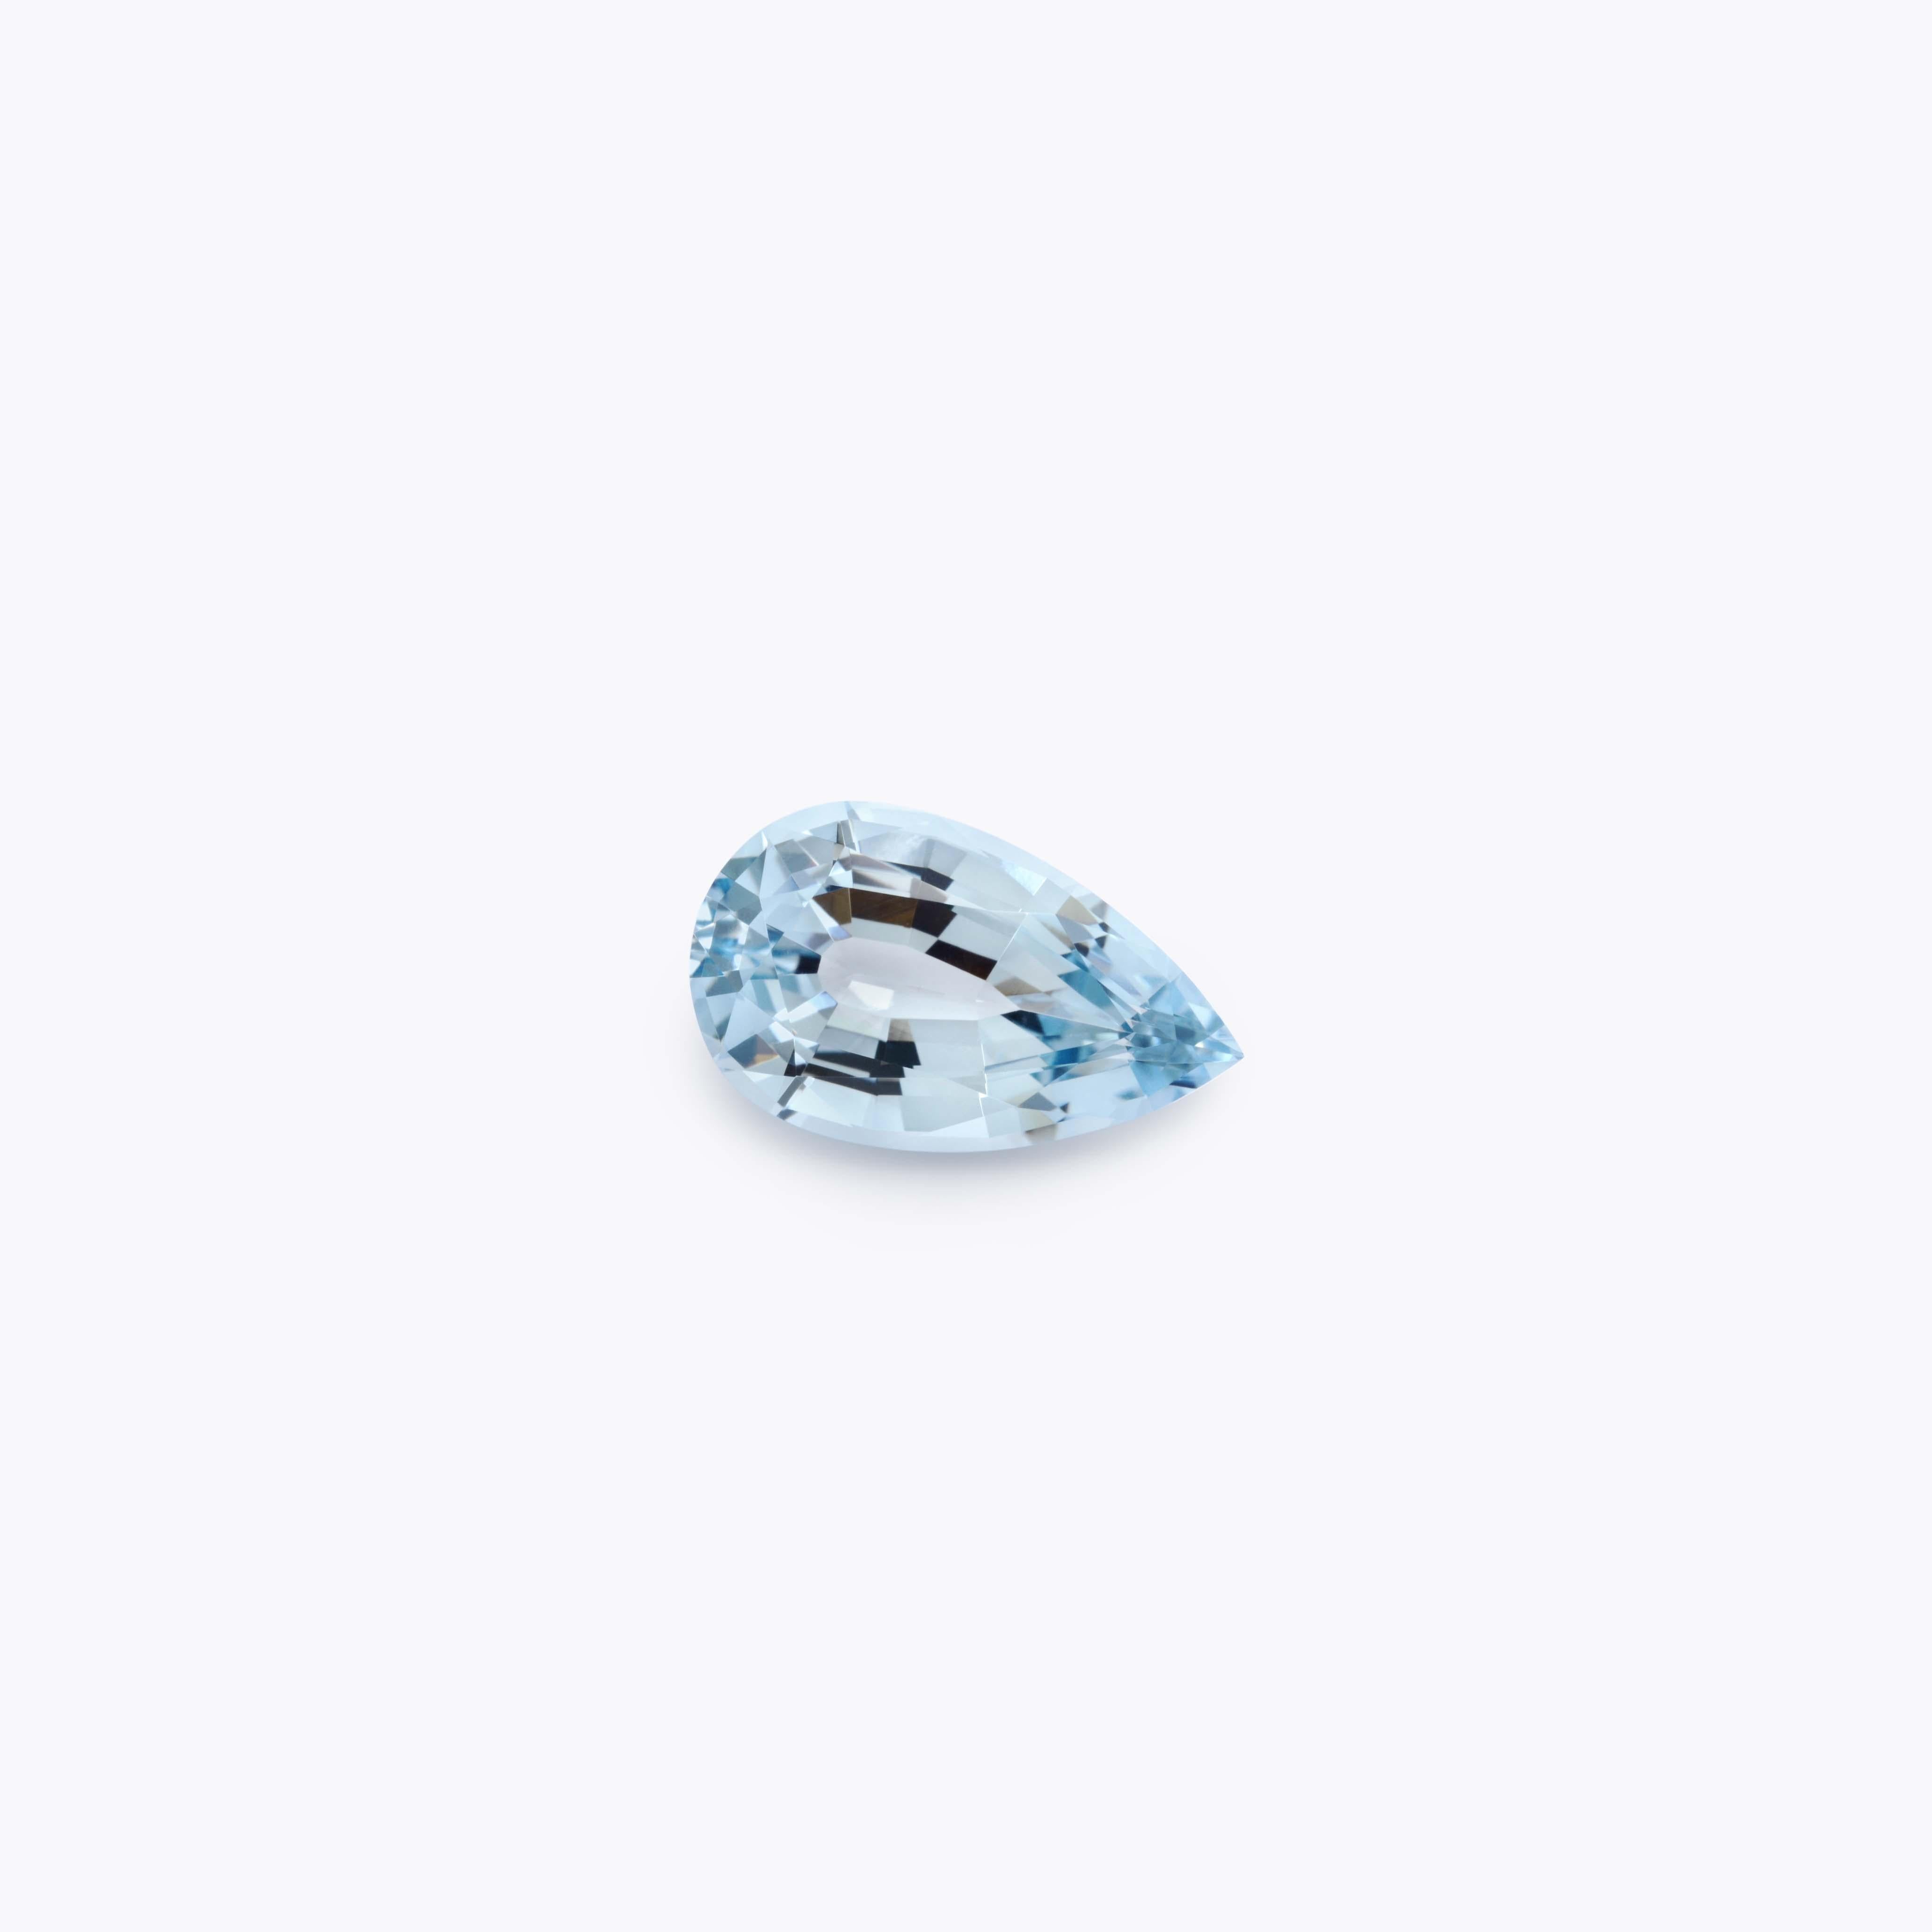 Classic 4.60 carat pear shape Aquamarine loose gemstone, offered unmounted to a sophisticated gemstone lover.
Dimensions: 13.6 x 9.4 x 6.2 mm.
Returns are accepted and paid by us within 7 days of delivery.
We offer supreme custom jewelry work upon